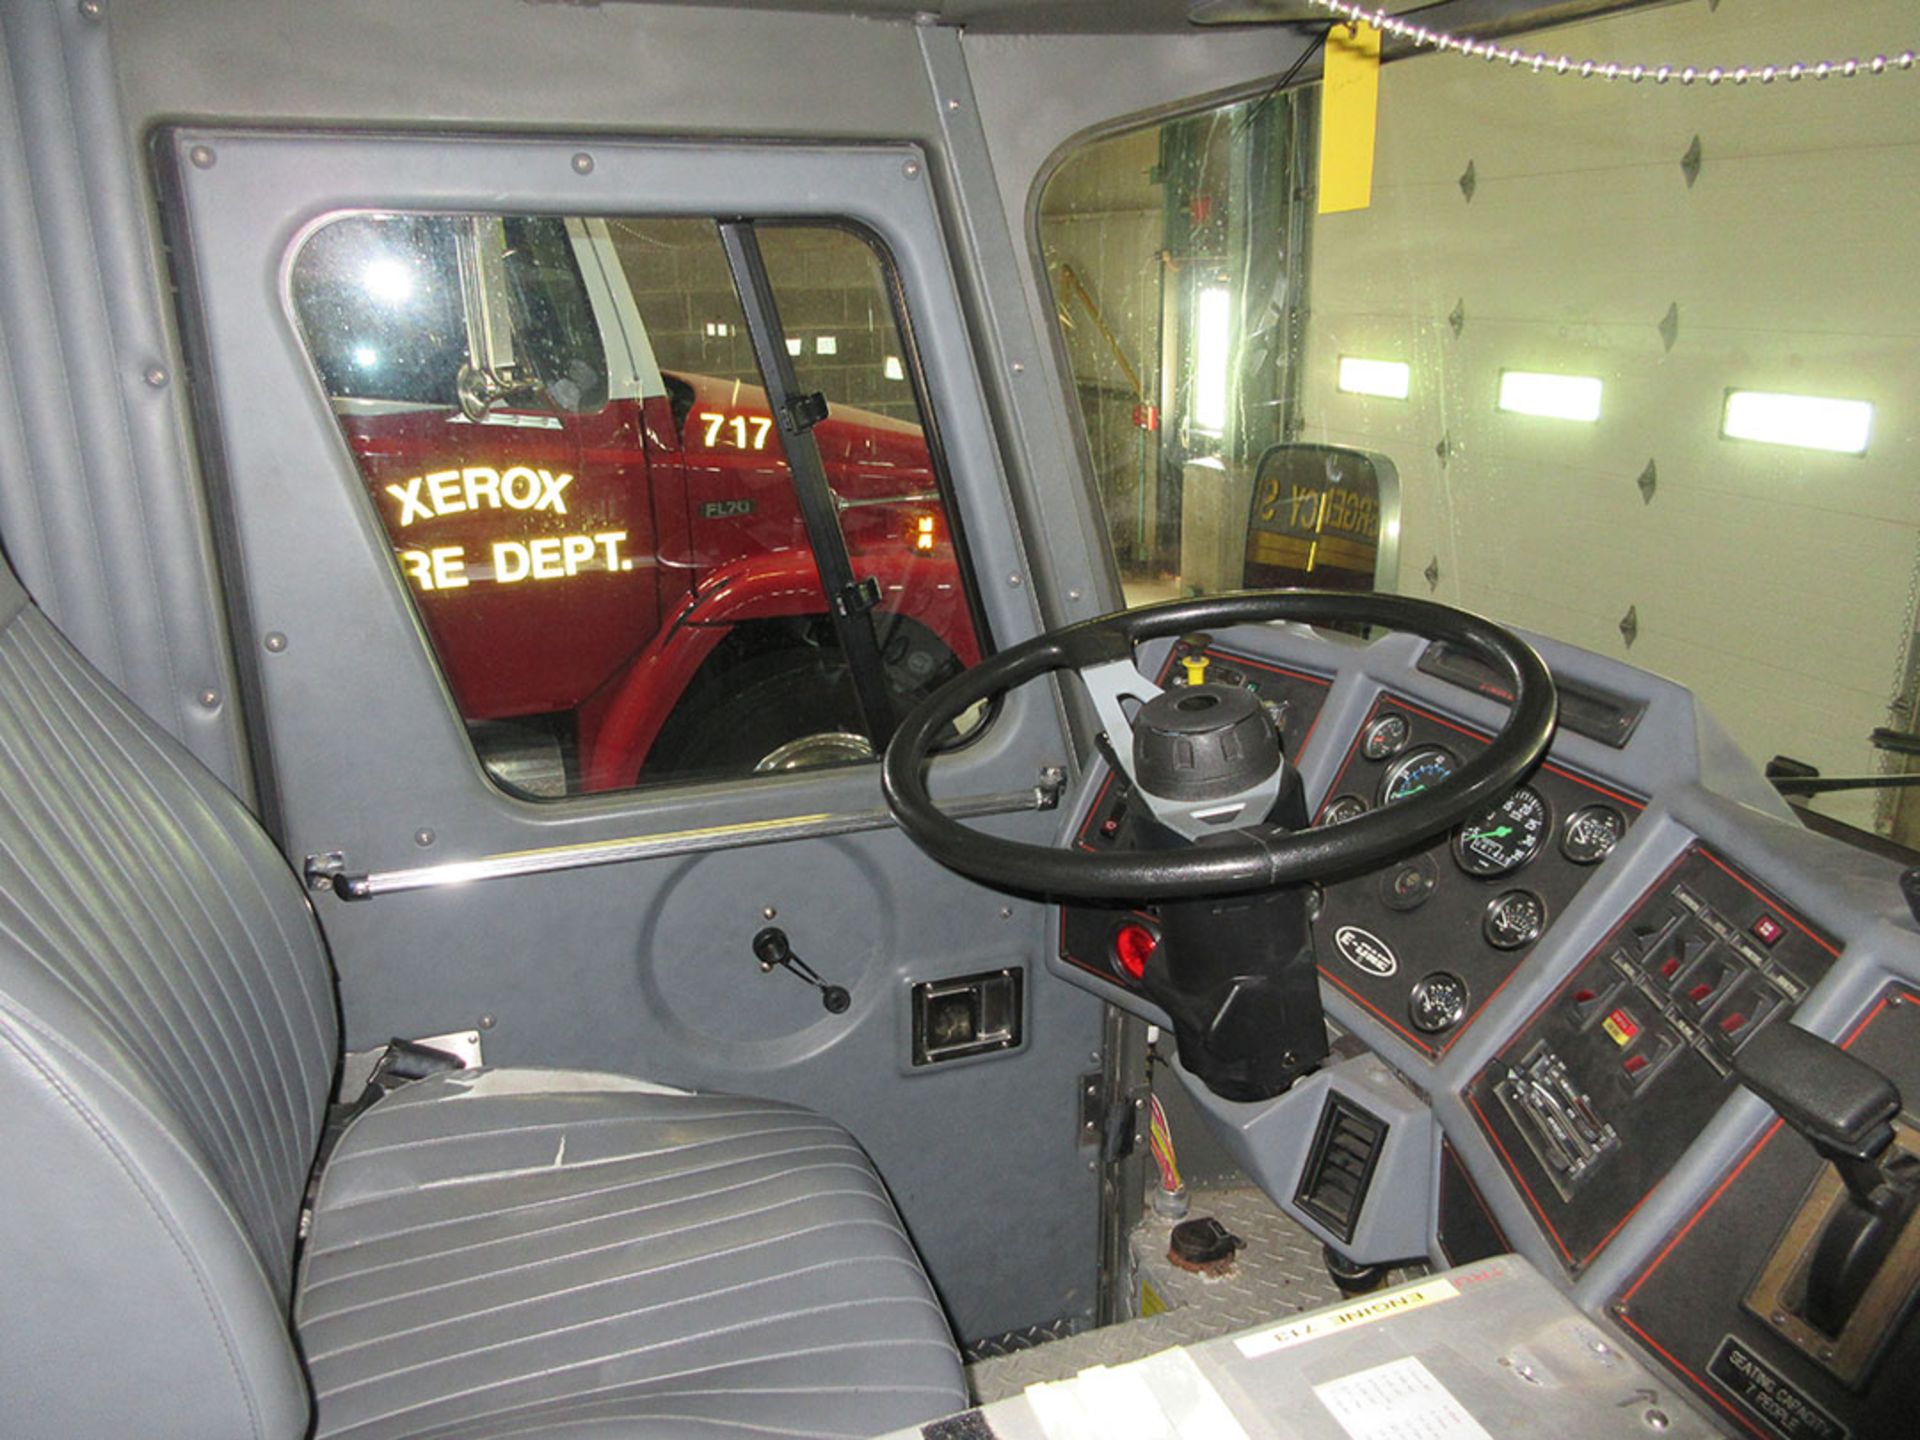 1992 EMERGENCY ONE FIRE ENGINE; GVWR 35,800, 23,000 MILES, 914 HOURS, BUMPER GRAVEL SHIELD, BUMPER - Image 5 of 6